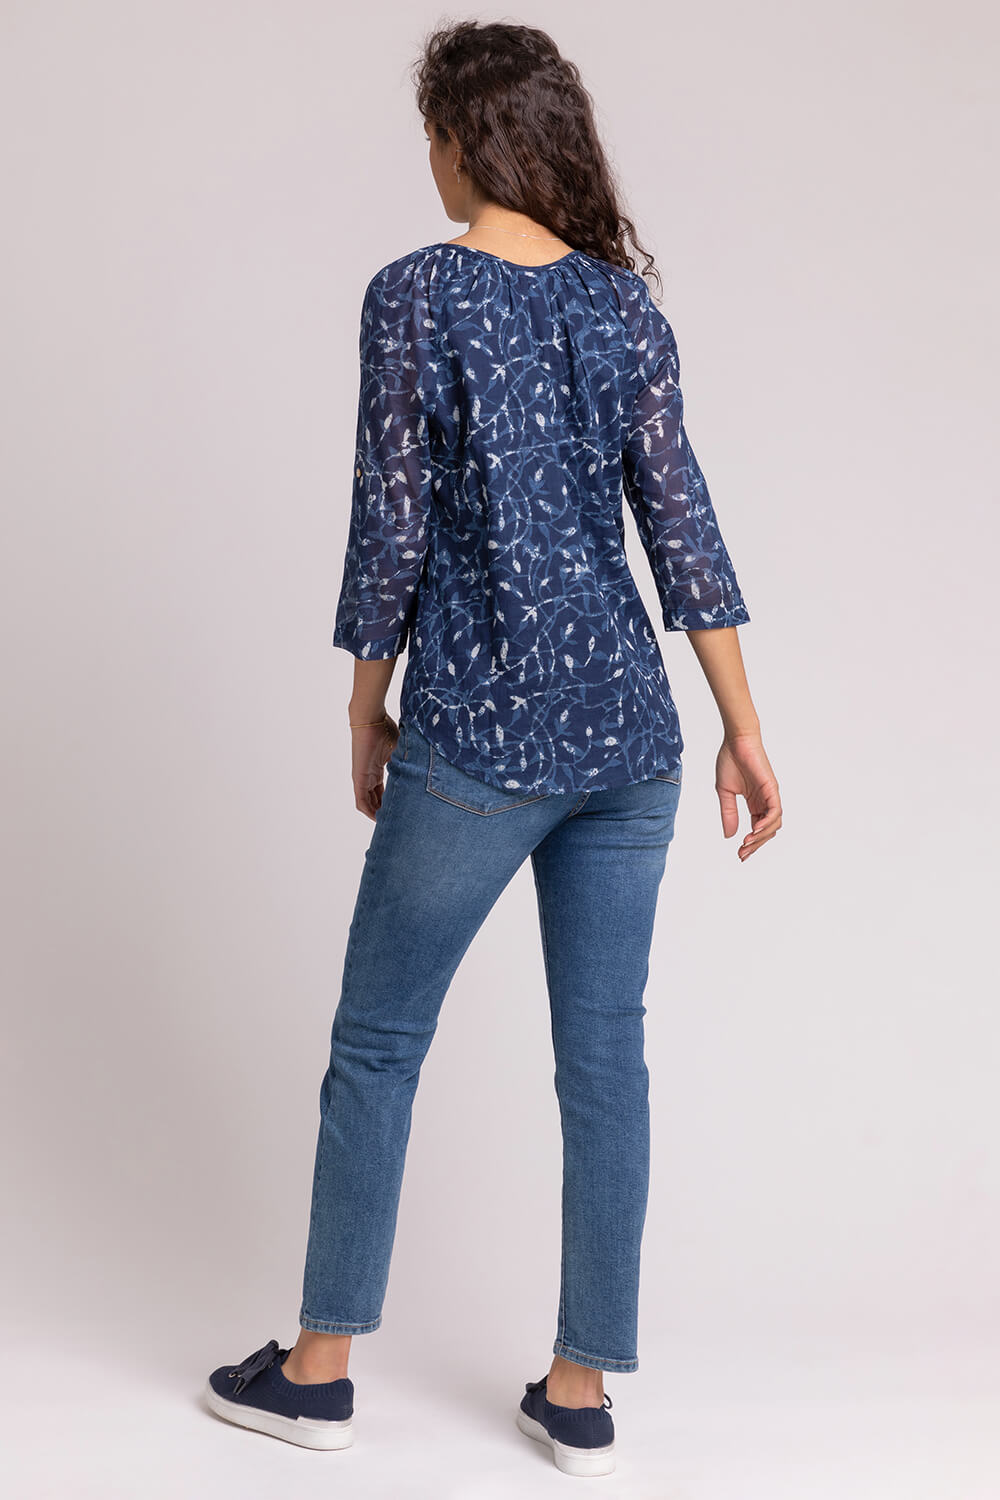 Navy  Abstract Leaf Print Button Top, Image 2 of 4